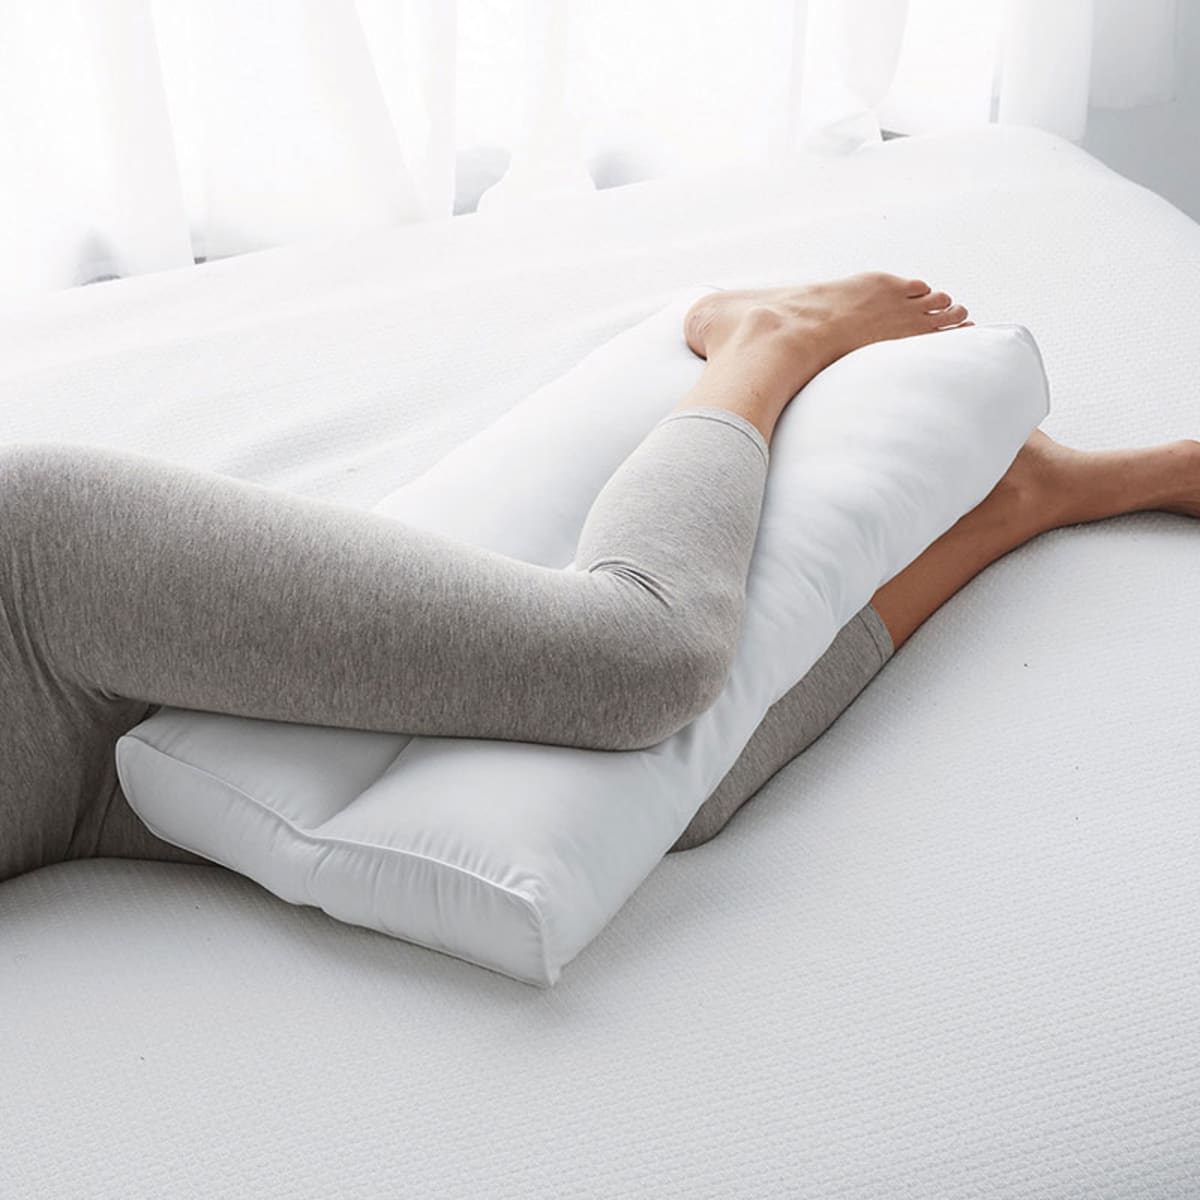 Knee and Leg Posture Pillow | The Company Store